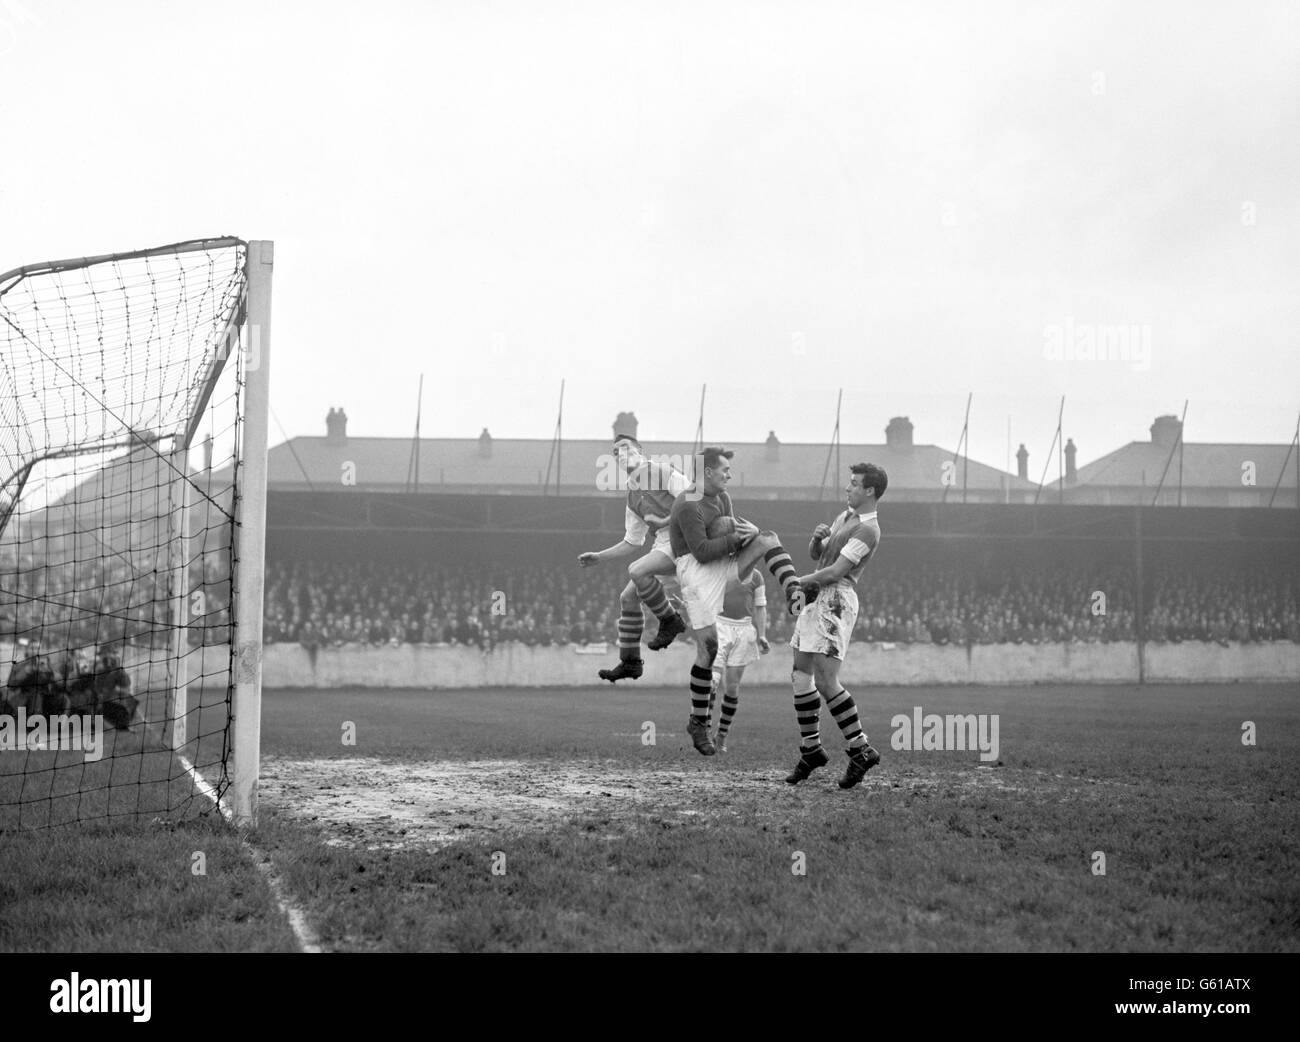 Walthamstow Avenue goalkeeper Stanislaus Gerula gathers the ball under pressure from Ipswich Town's Tom Garneys (l) and teammate Lou Branan (r). Stock Photo